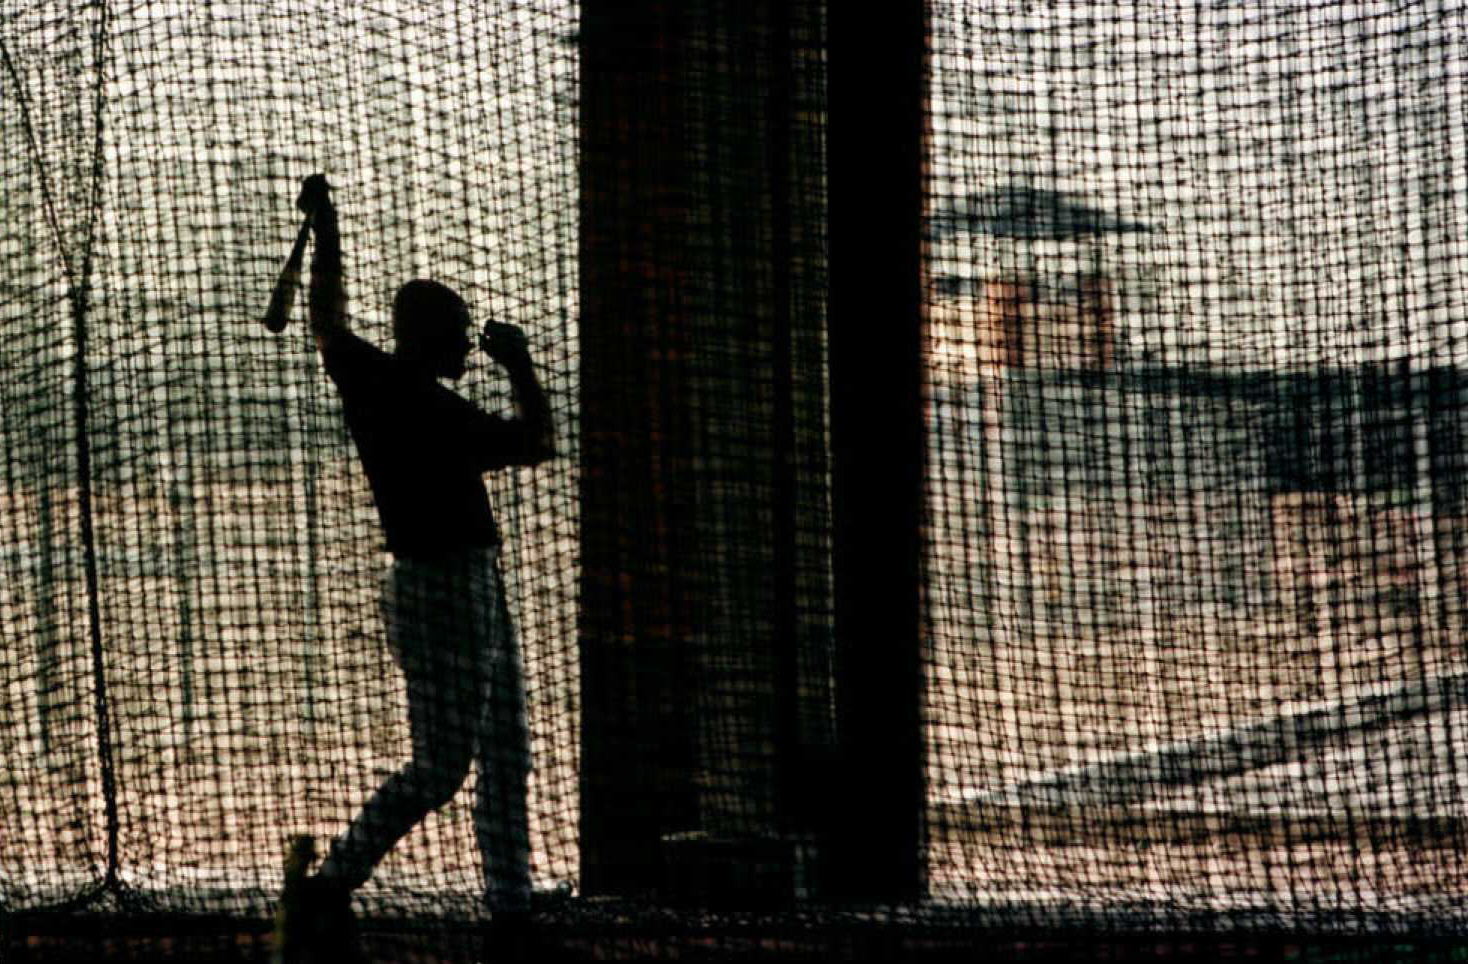 A baseball player is silhouetted as he follows through while practicing in the batting cages